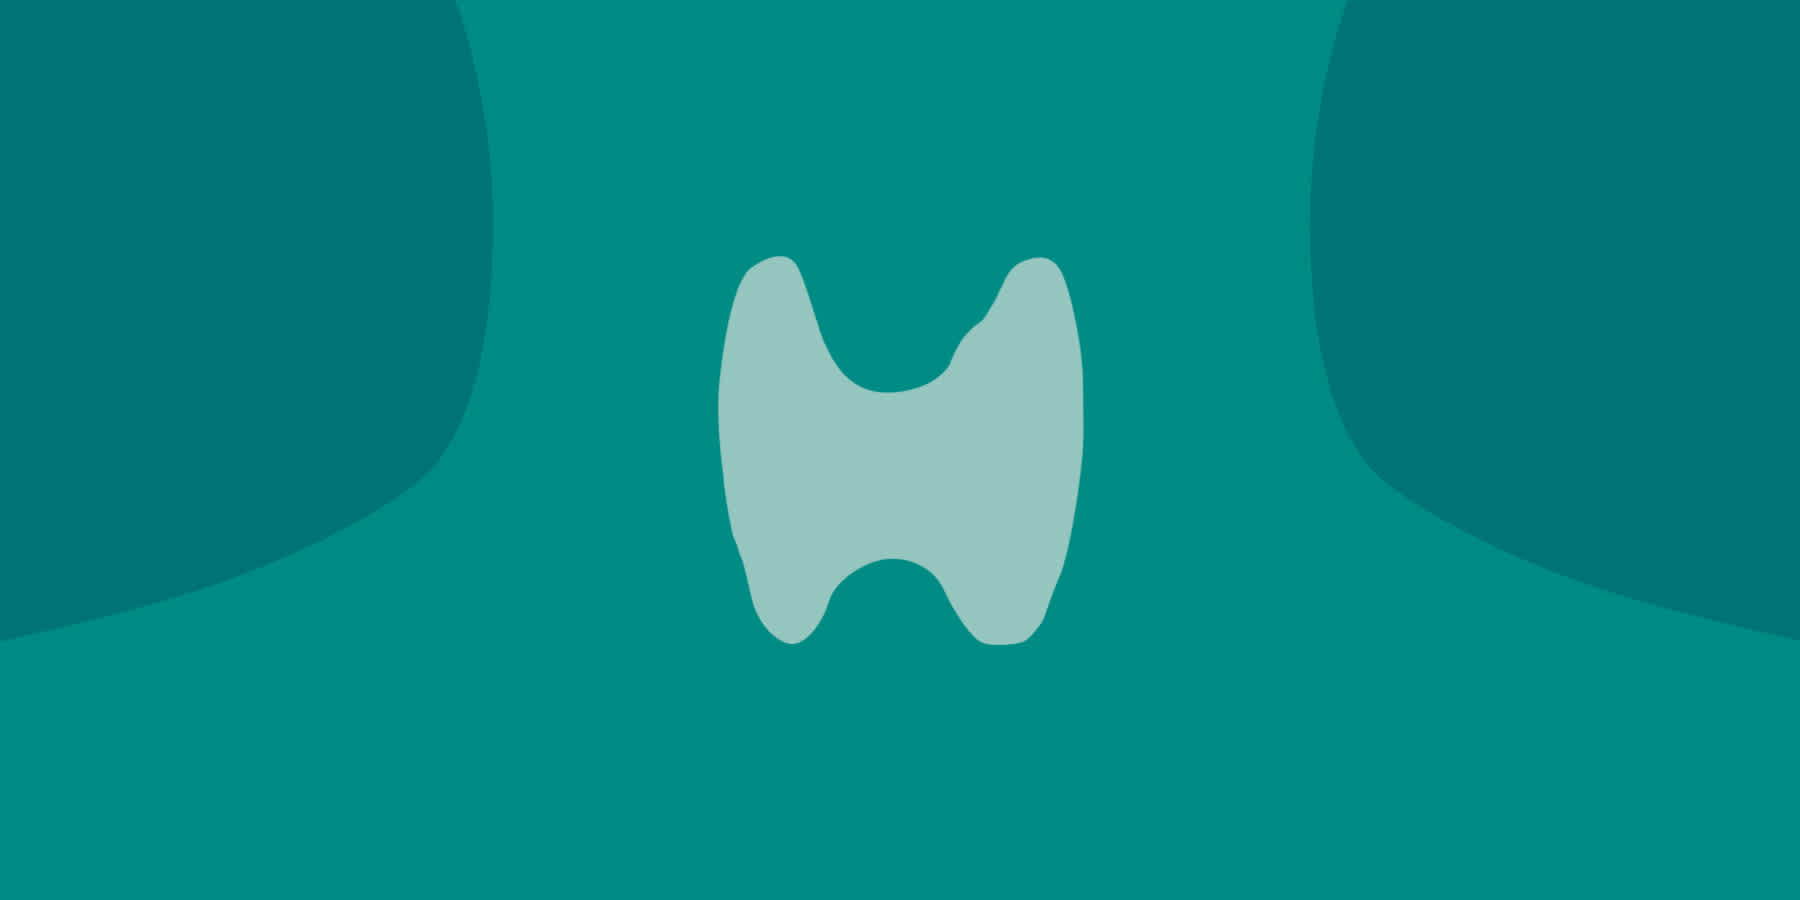 Teal-colored illustration of anatomical thyroid gland